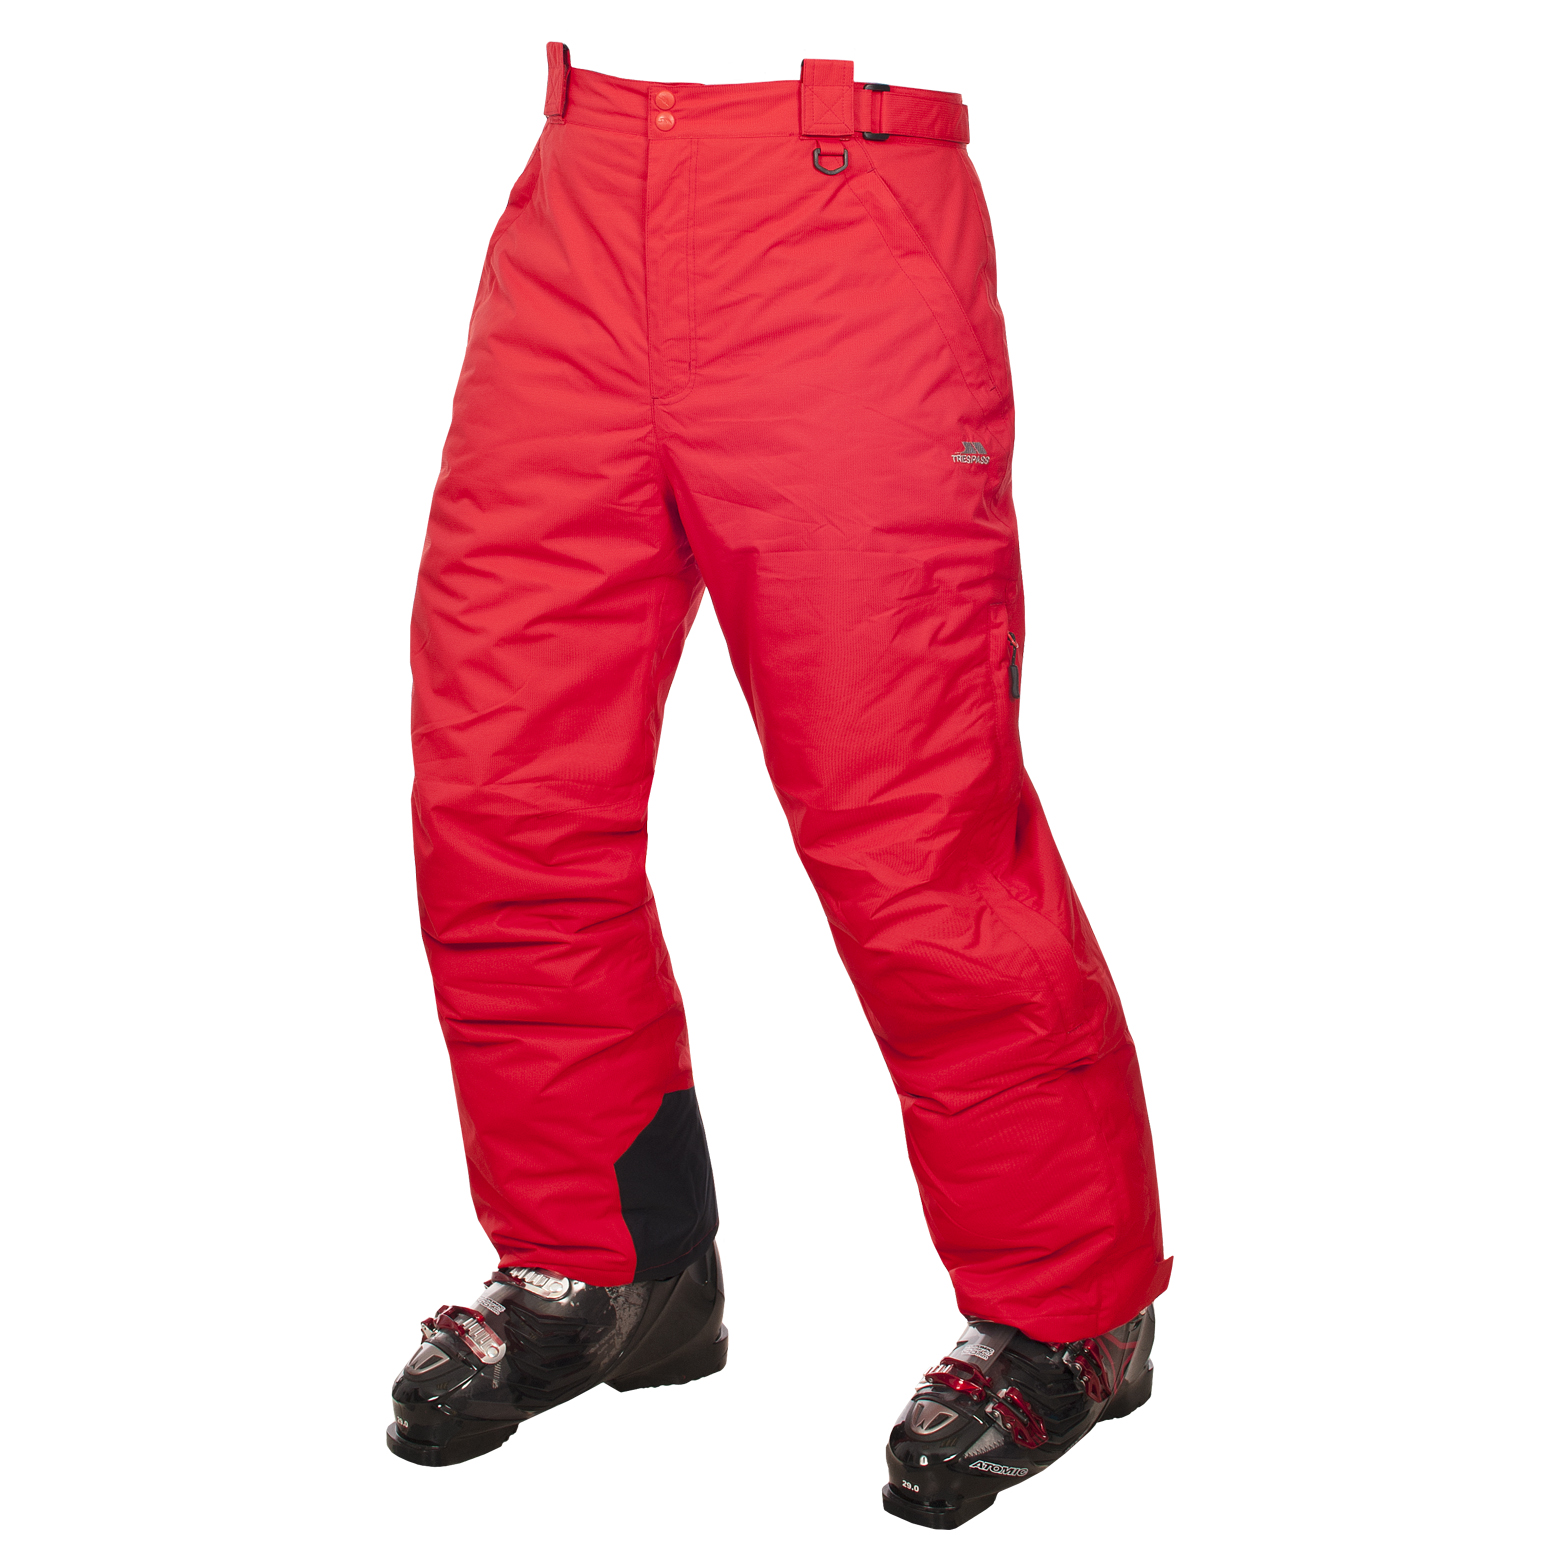 Women’s and Men’s Ski Trousers Up For Grabs – careyfashion.com